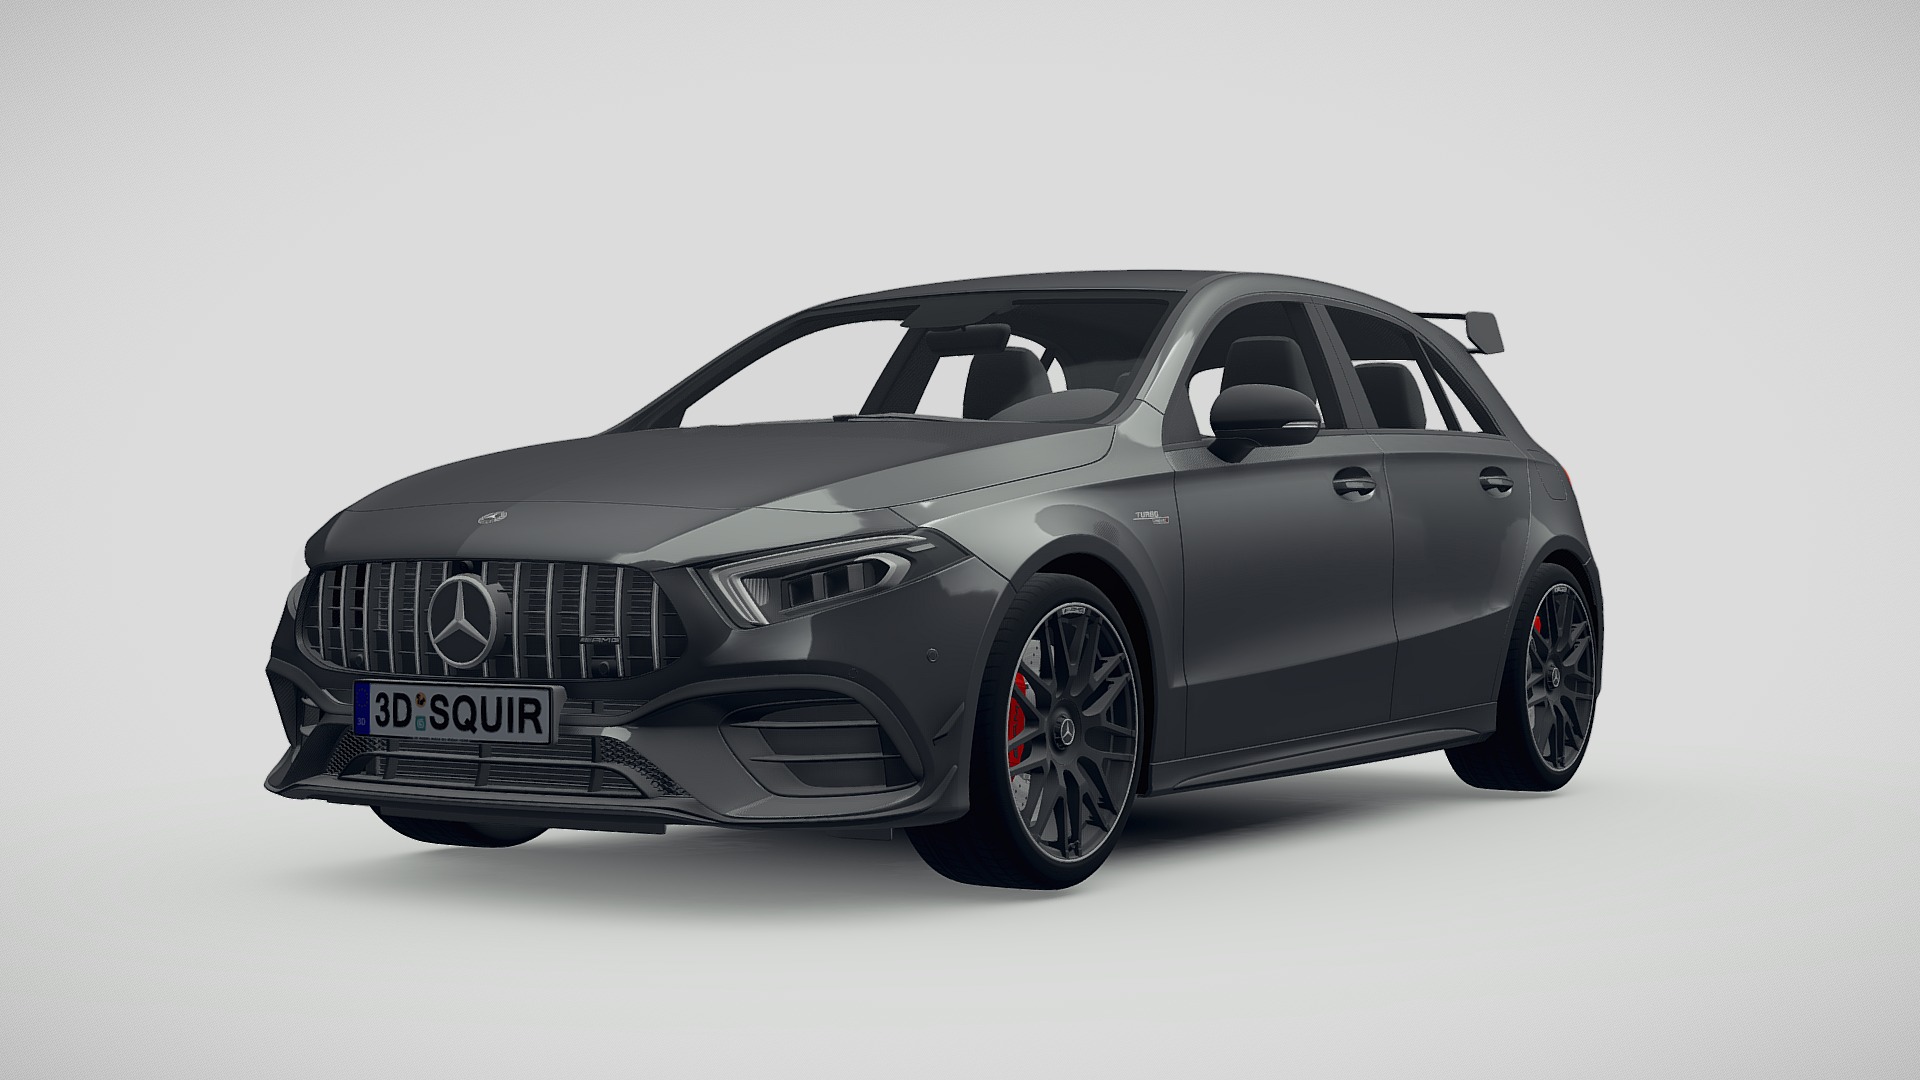 3D model Mercedes-Benz A45 S AMG 4Matic 2020 - This is a 3D model of the Mercedes-Benz A45 S AMG 4Matic 2020. The 3D model is about a silver sports car.